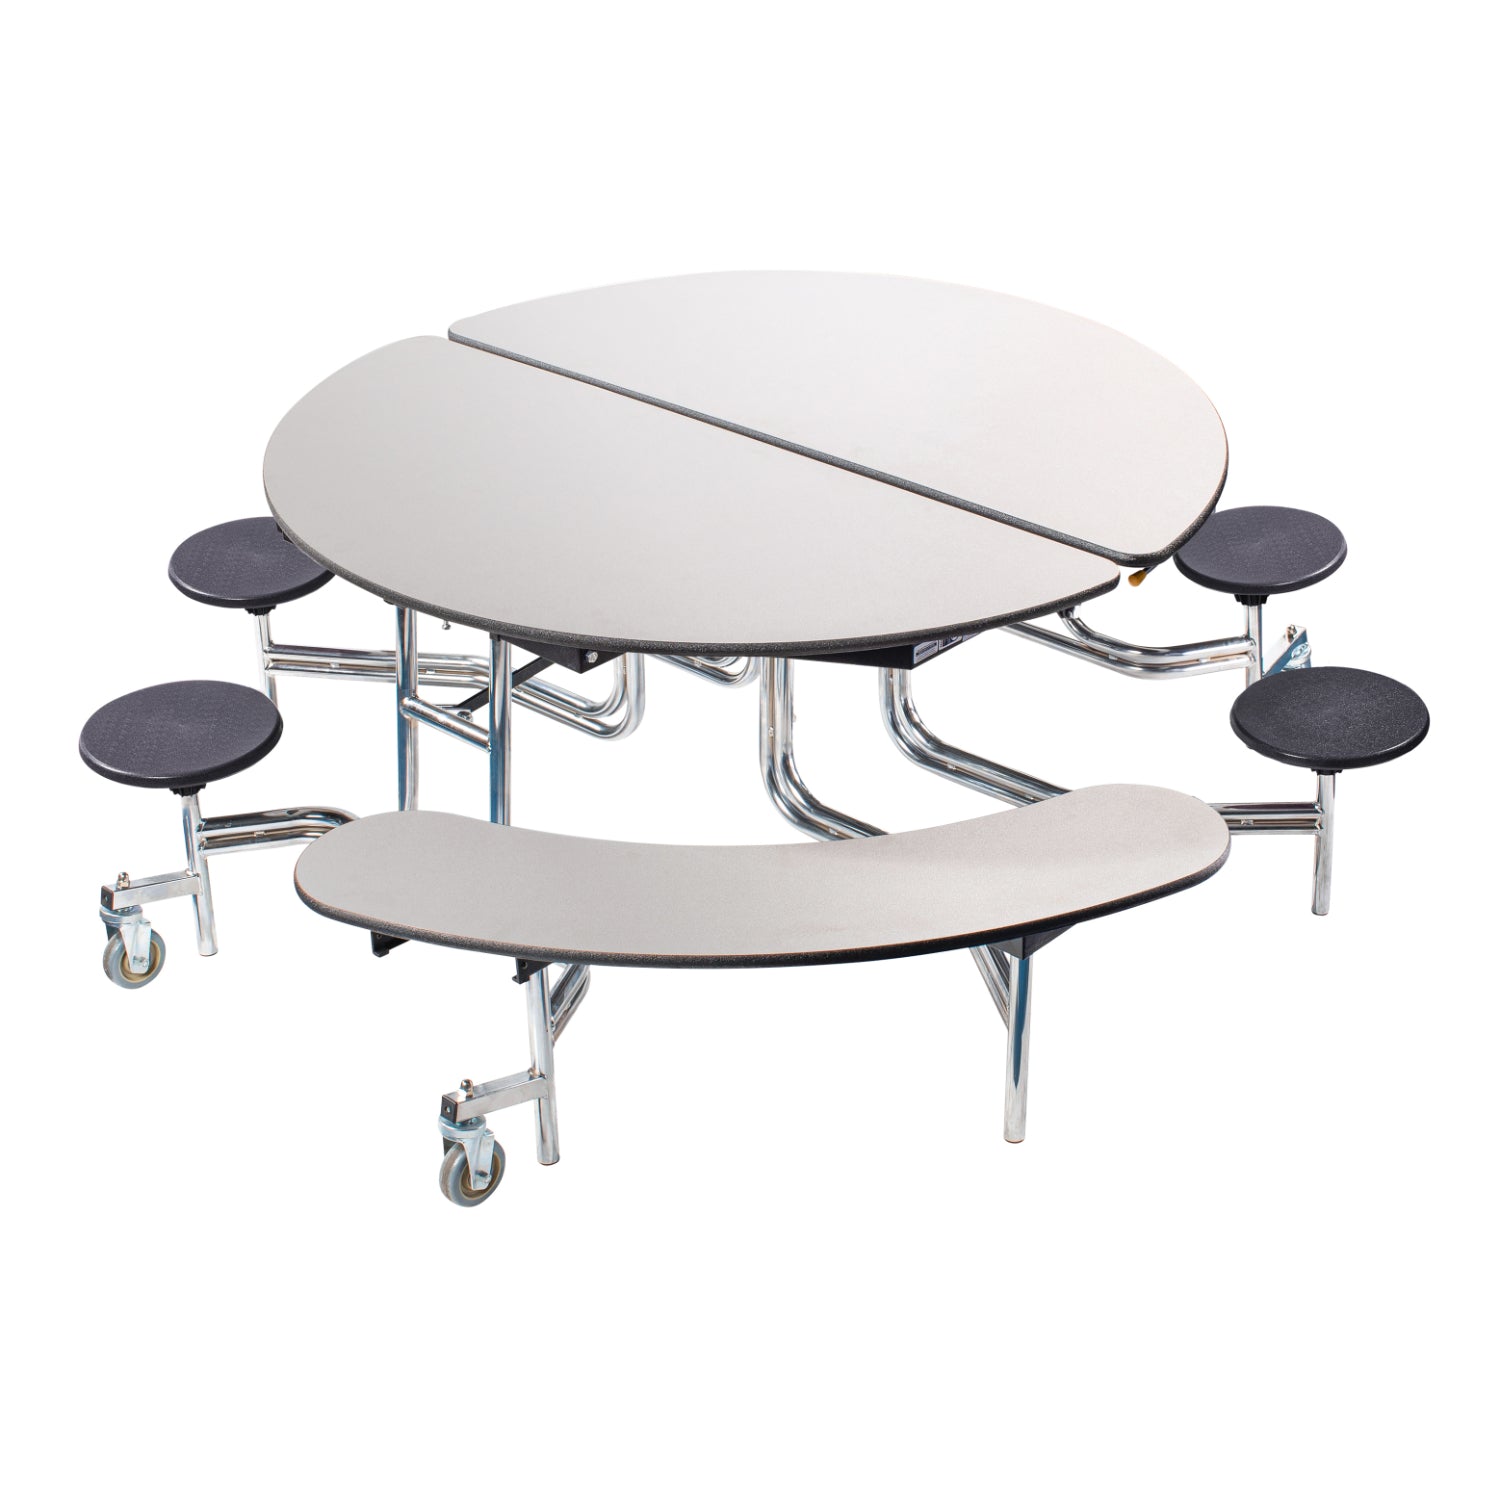 Mobile Combo Cafeteria Table, 60" Round with Stools and Benches, Particleboard Core, Vinyl T-Mold Edge, Chrome Frame